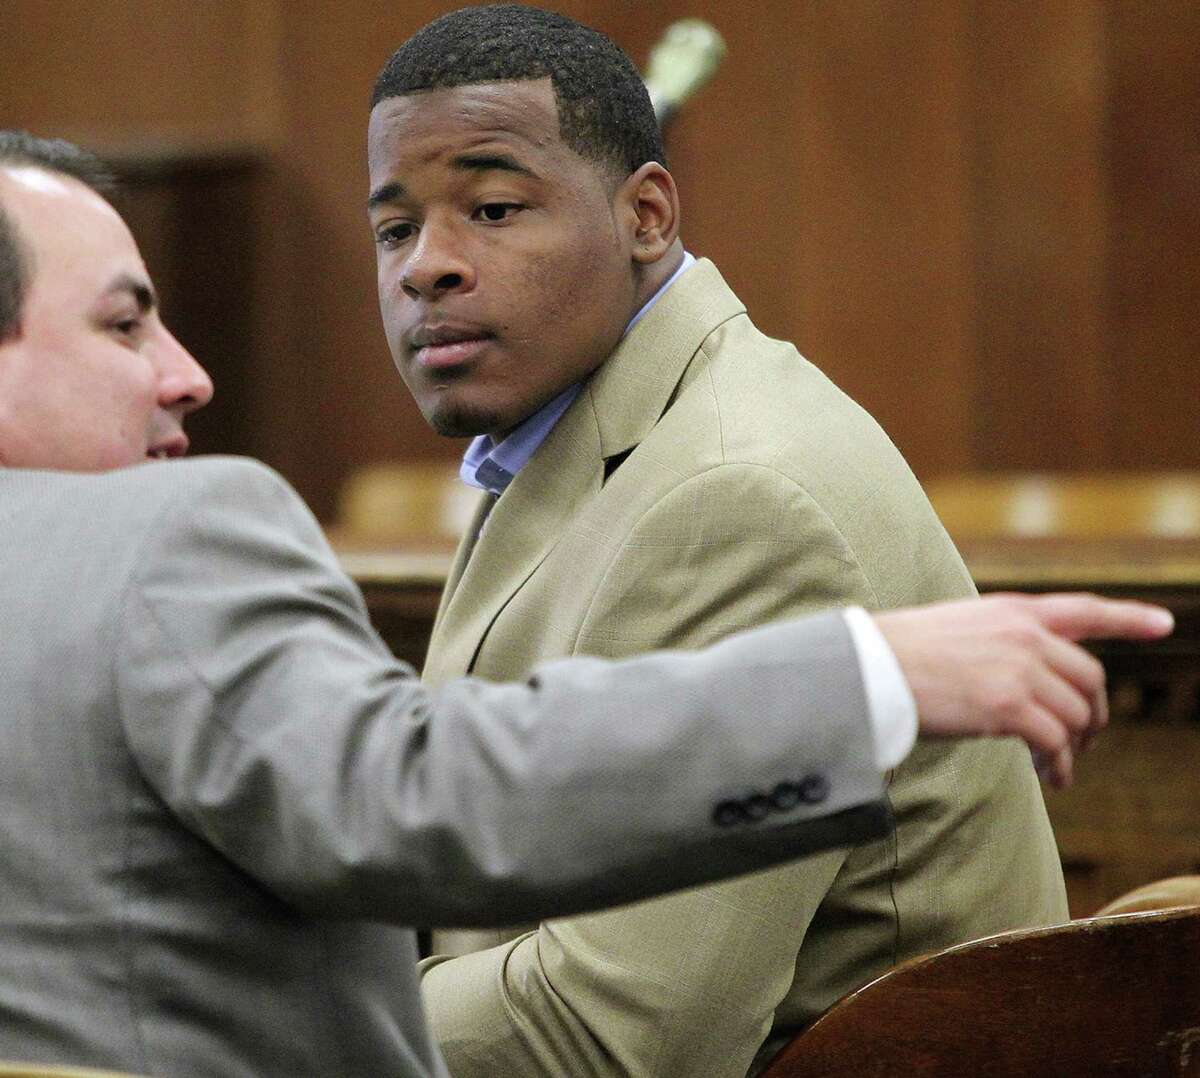 FILE - In this Jan. 23, 2014, file photo, former Baylor football player Tevin Elliott waits with a unidentified lawyer in a McLennan county courtroom in Waco, Texas. A woman has filed a federal lawsuit against Baylor University contending that the largest Baptist school in the country was "deliberately indifferent" to sexual assault allegations against a former football player. The lawsuit alleges that Baylor failed to act against Tevin Elliott despite receiving six complaints from women claiming he assaulted them.